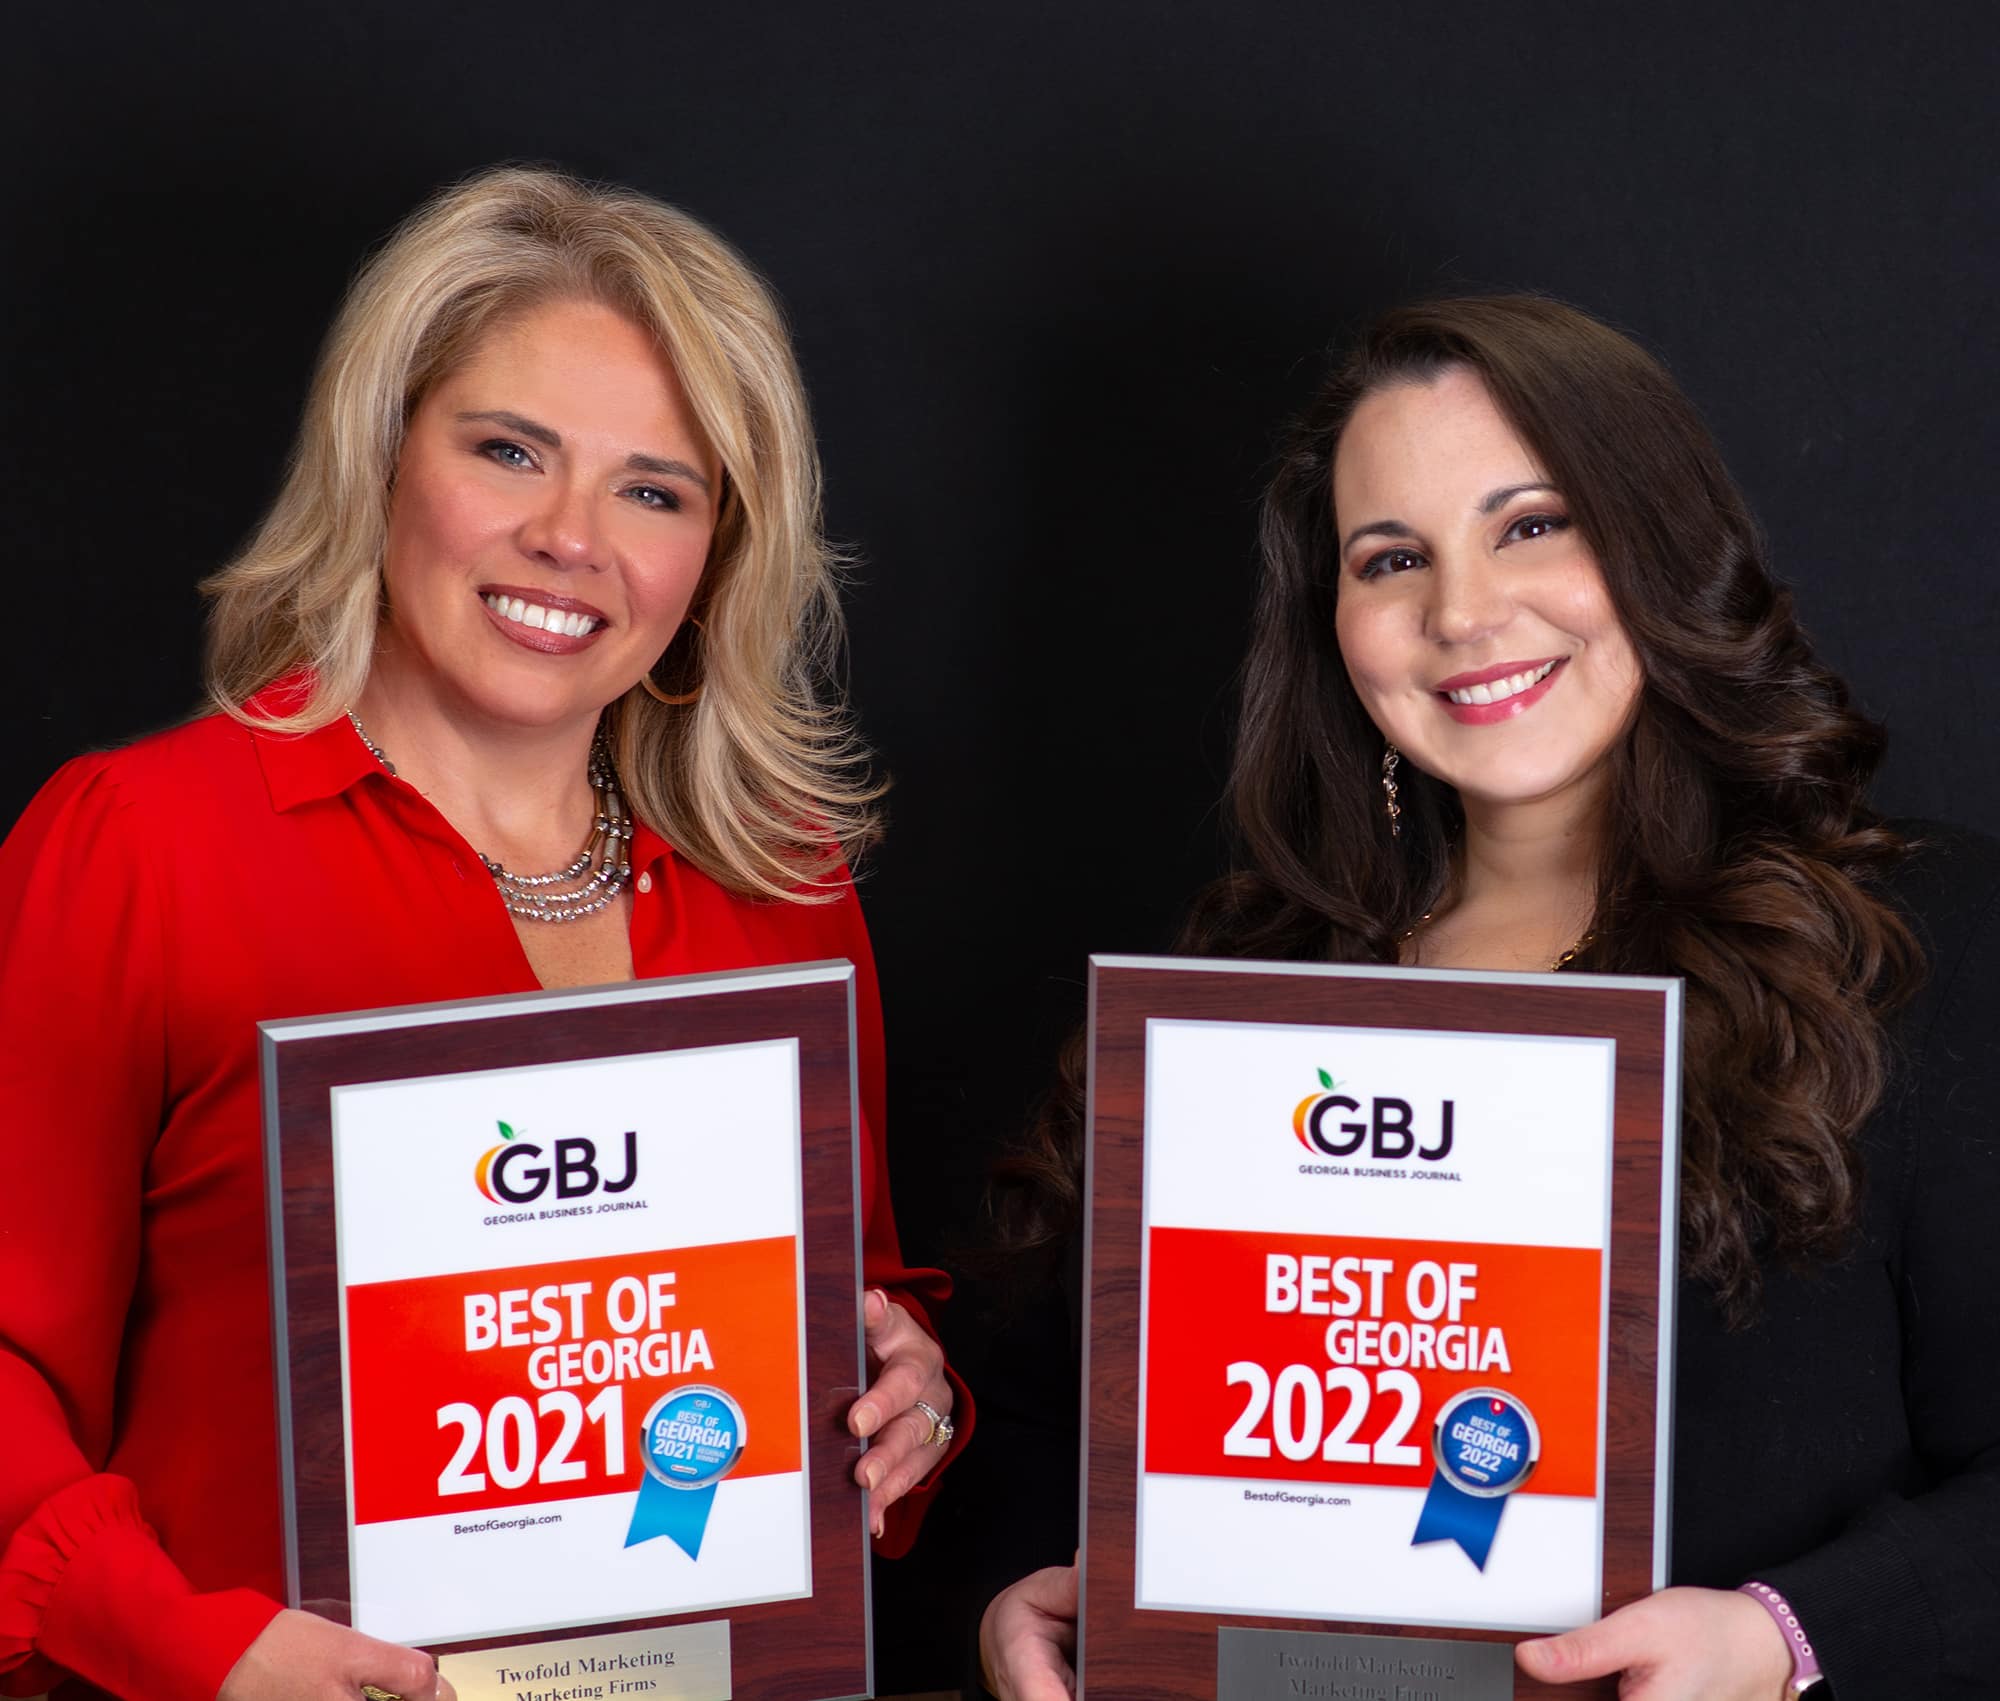 Business owners of Twofold Marketing, Heidi and Jessica, holding the "Best Marketing Agency in Georgia" awards for 2021 and 2022